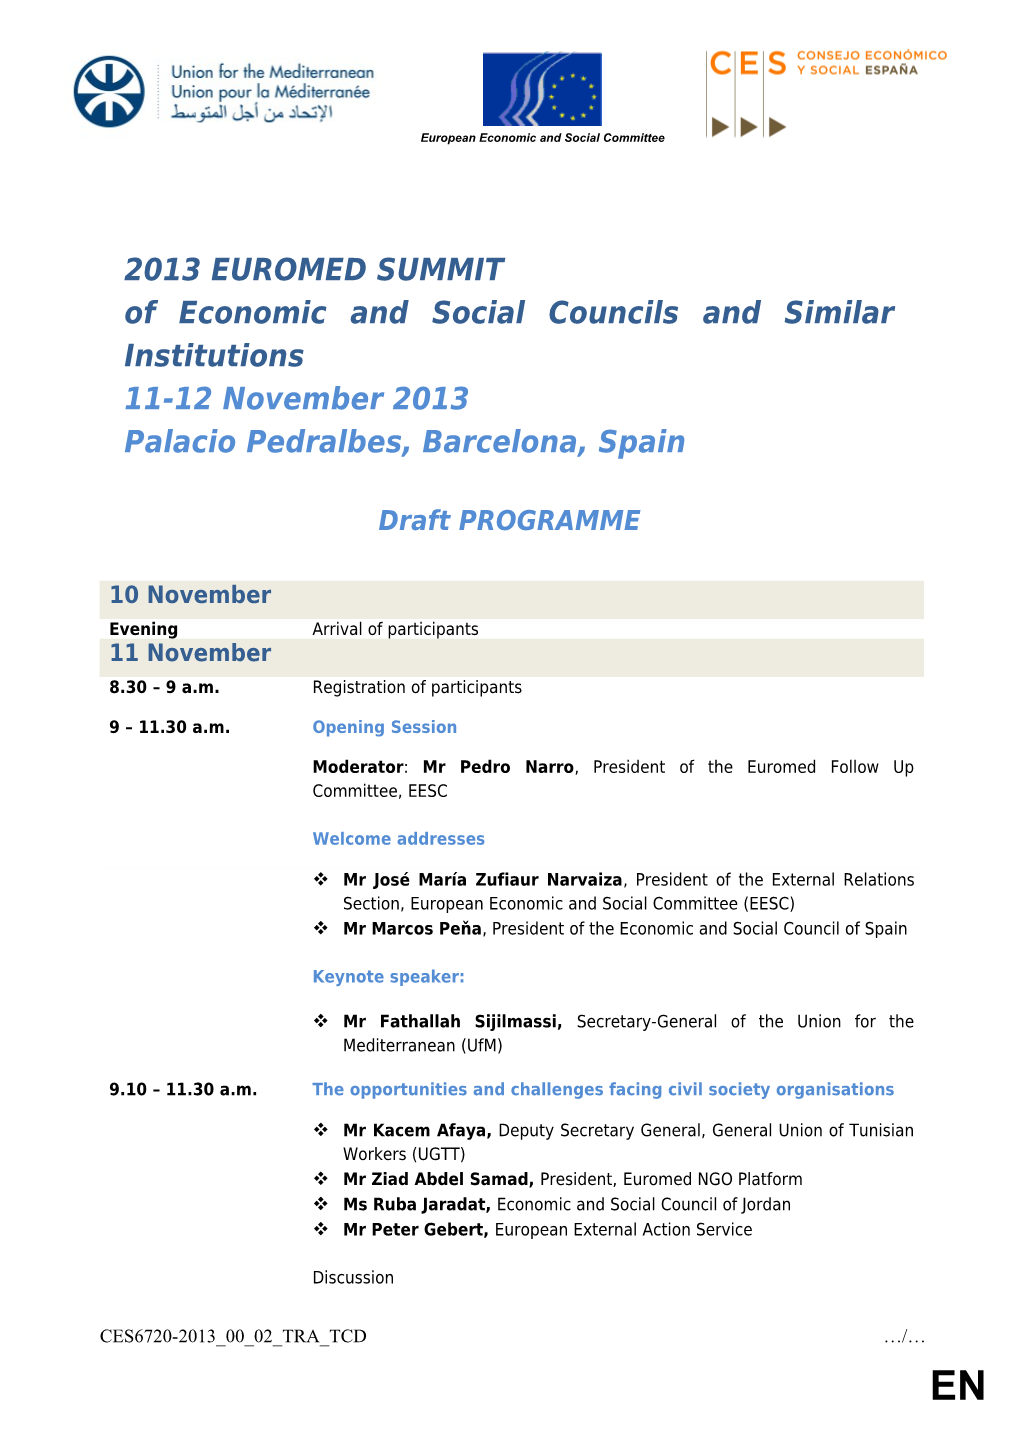 PROGRAMME Euromed Summit